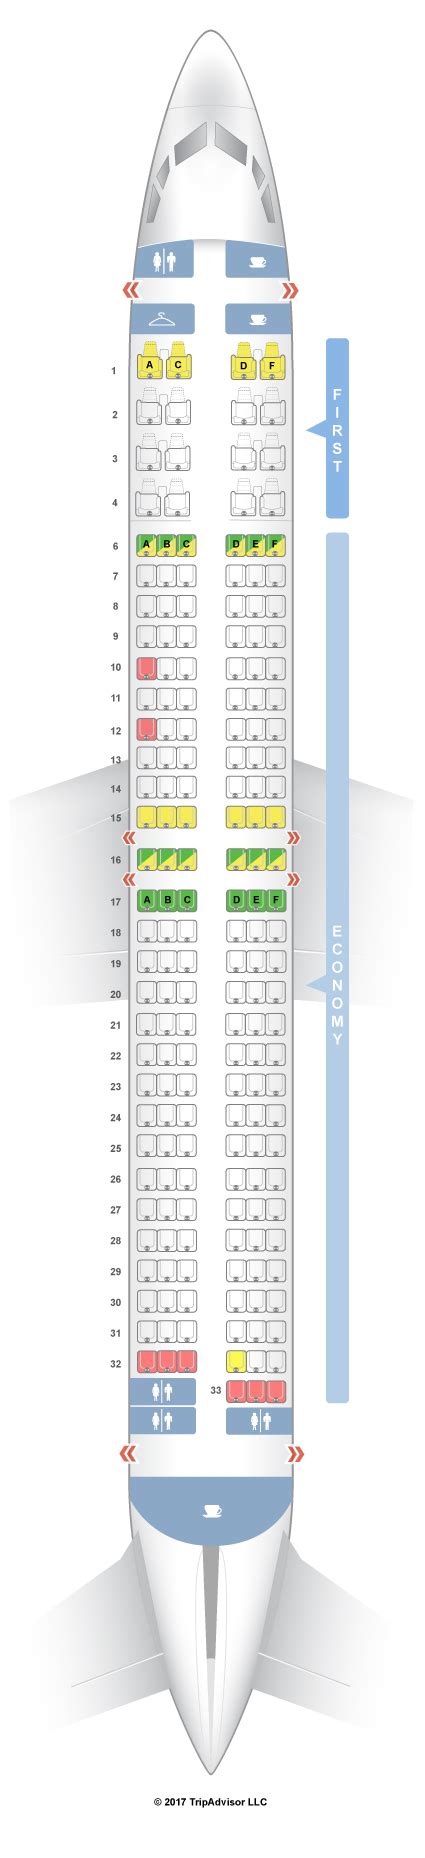 737 900 alaska seat map. local_pizza. Food & Snacks. Seat 6F is a standard economy window seat with 32" of seat pitch, which is average across Boeing 737-900's worldwide. 